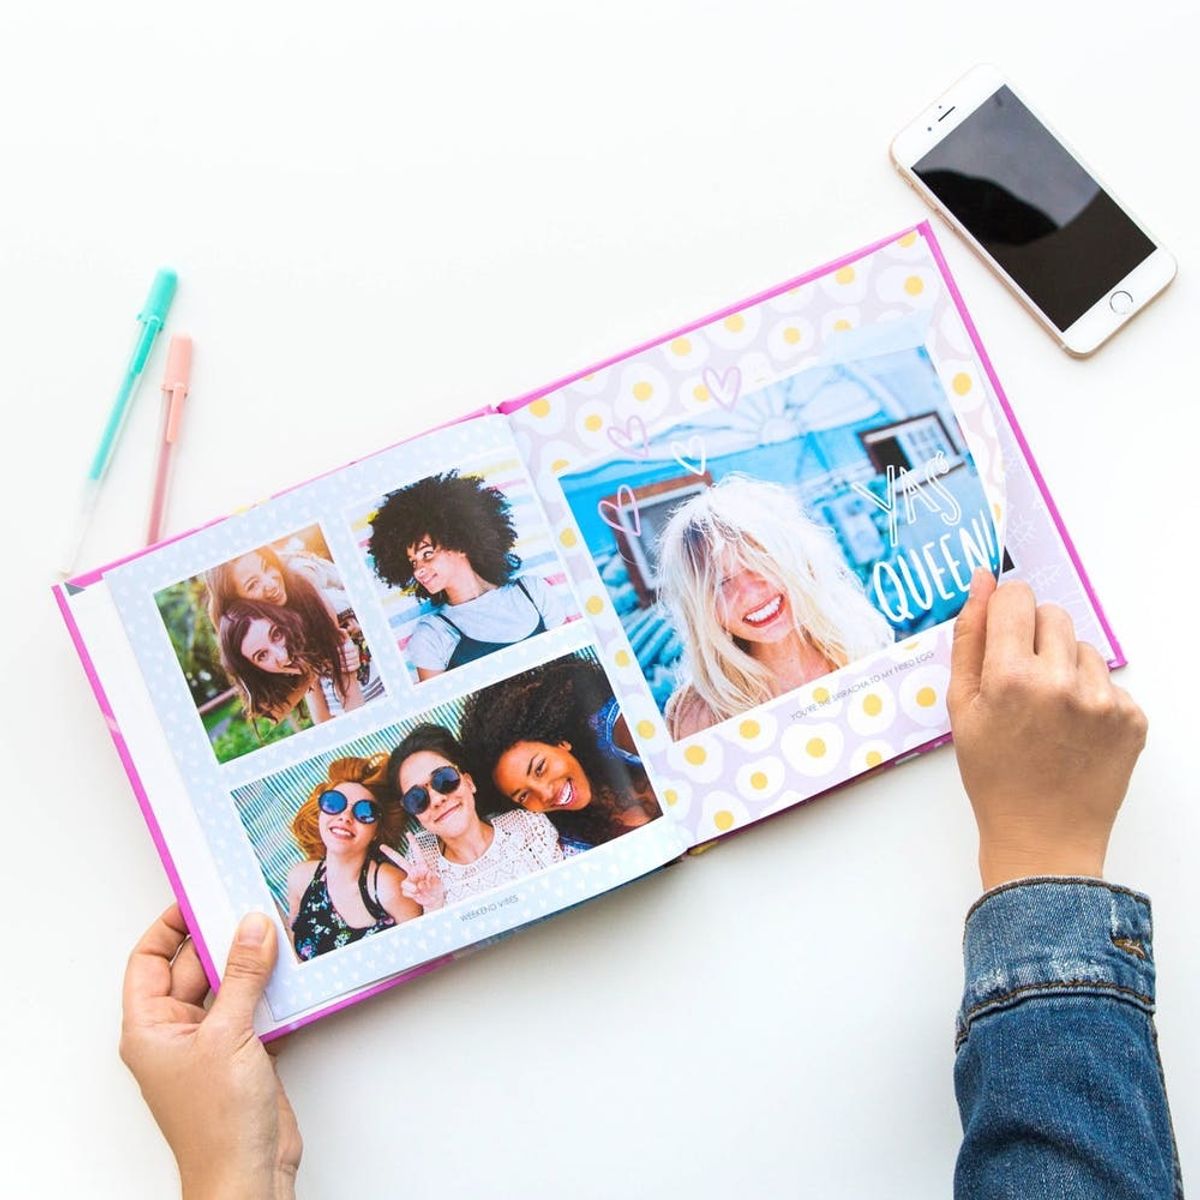 Say What!? 50% Off Mixbook Photo Prints and More!